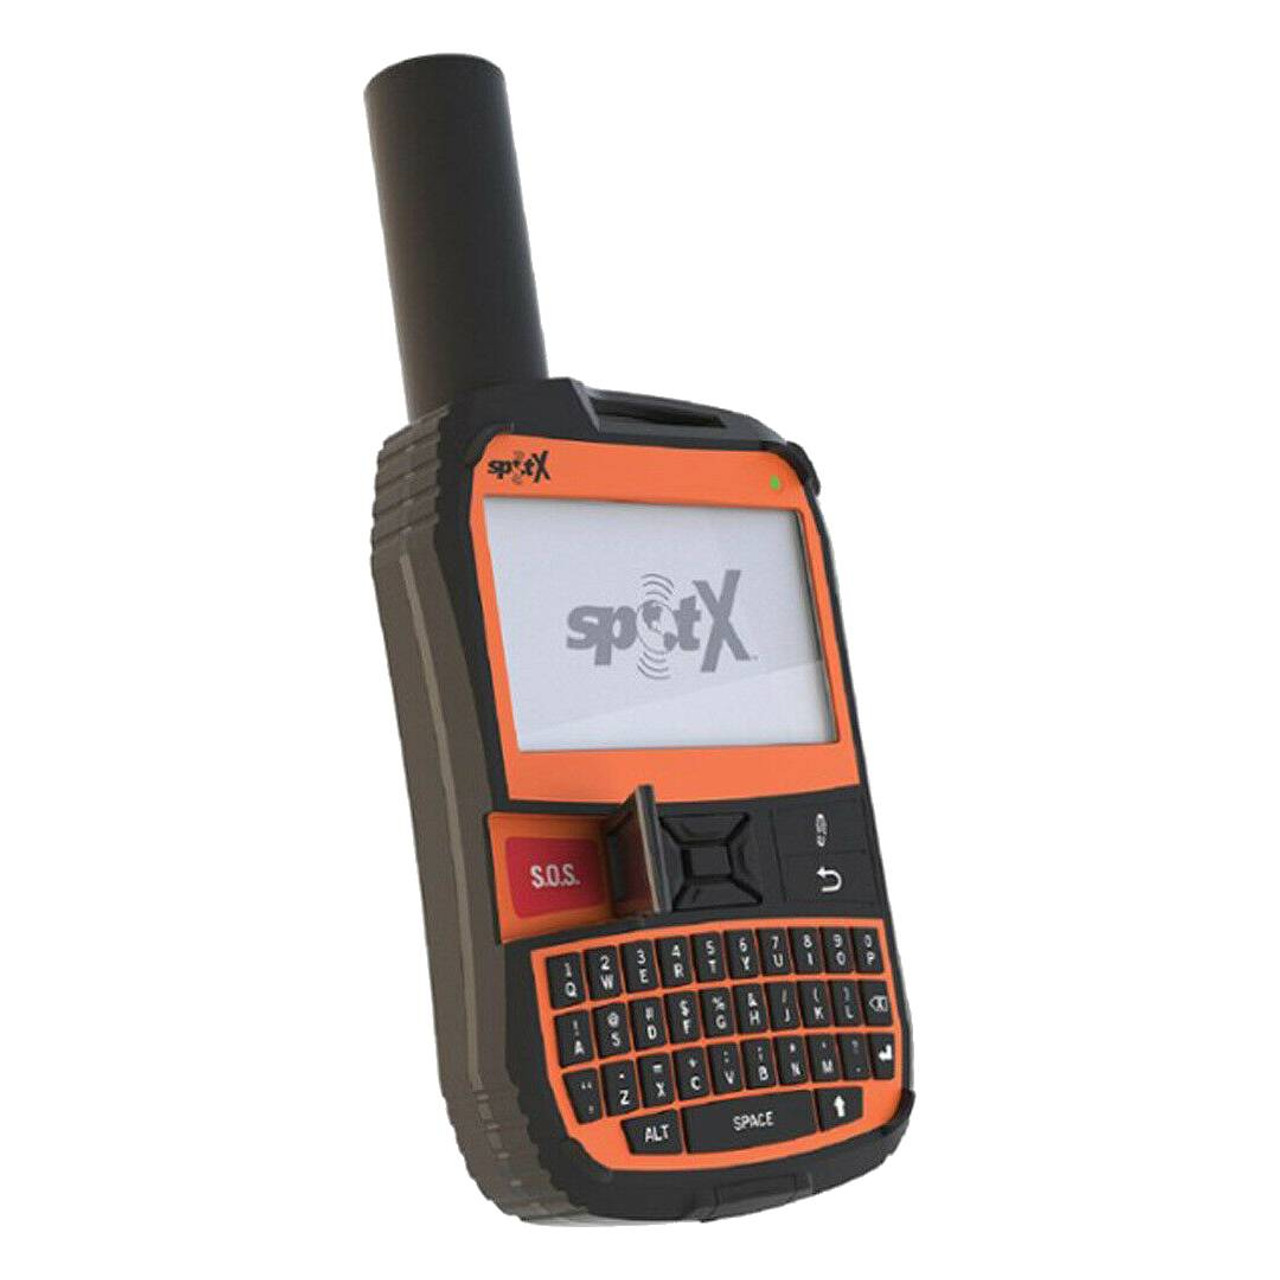 Pursue YOUR PASSION - EMBRACE THE JOURNEY...  SPOT X provides 2-way satellite messaging when you’re off the grid or beyond reliable cellular coverage. Connect SPOT X to your smart phone via Bluetooth wireless technology.